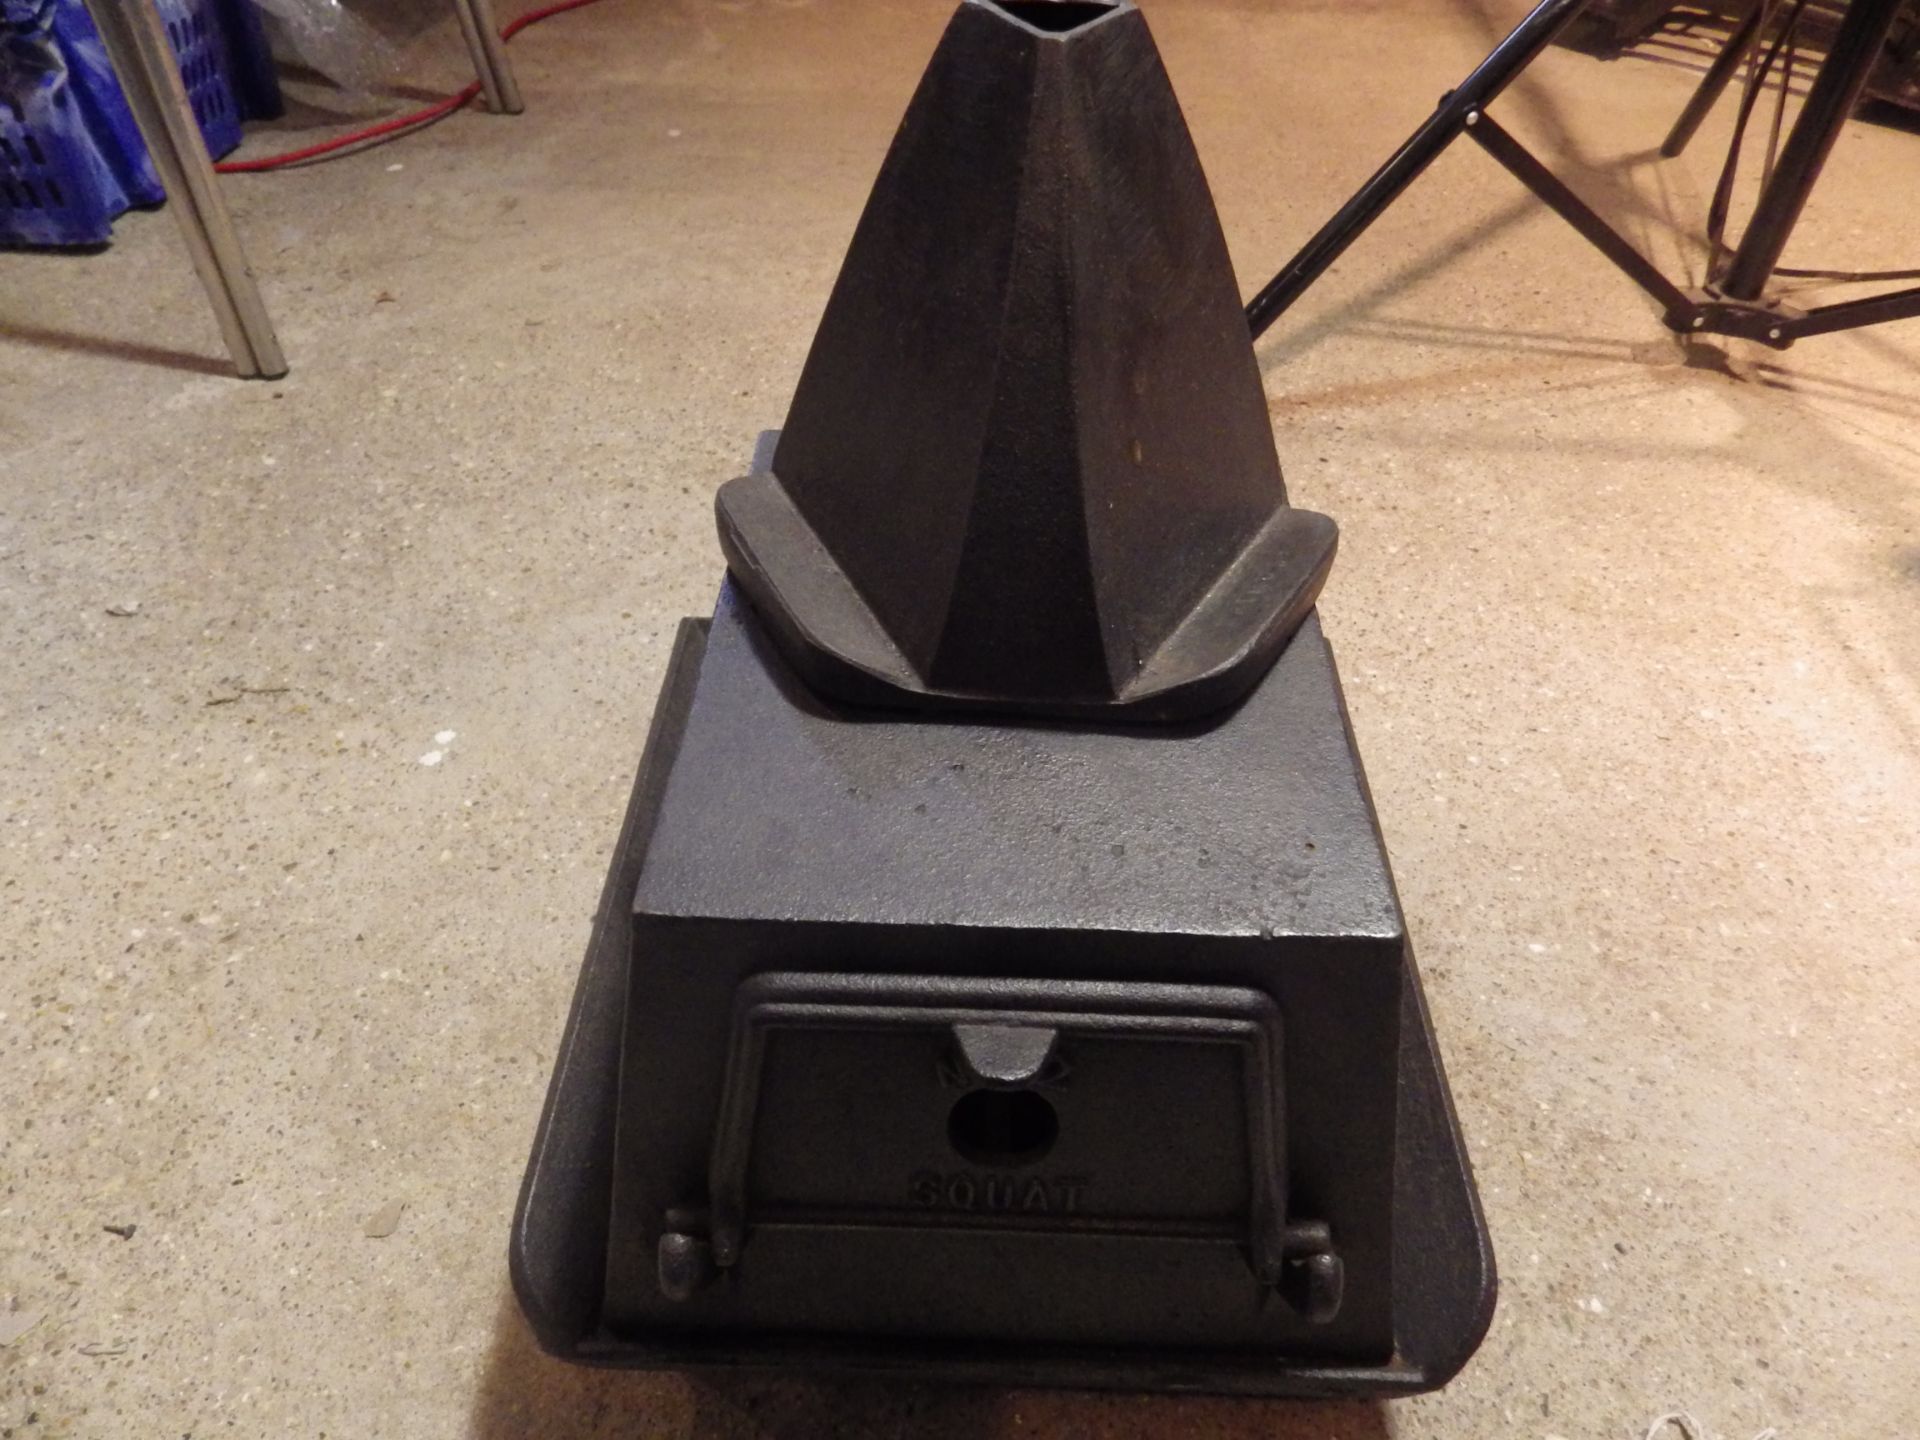 No.2 Squat cast iron stove with grate and hinged door and chimney flue stand rest for 3 irons - Image 4 of 4